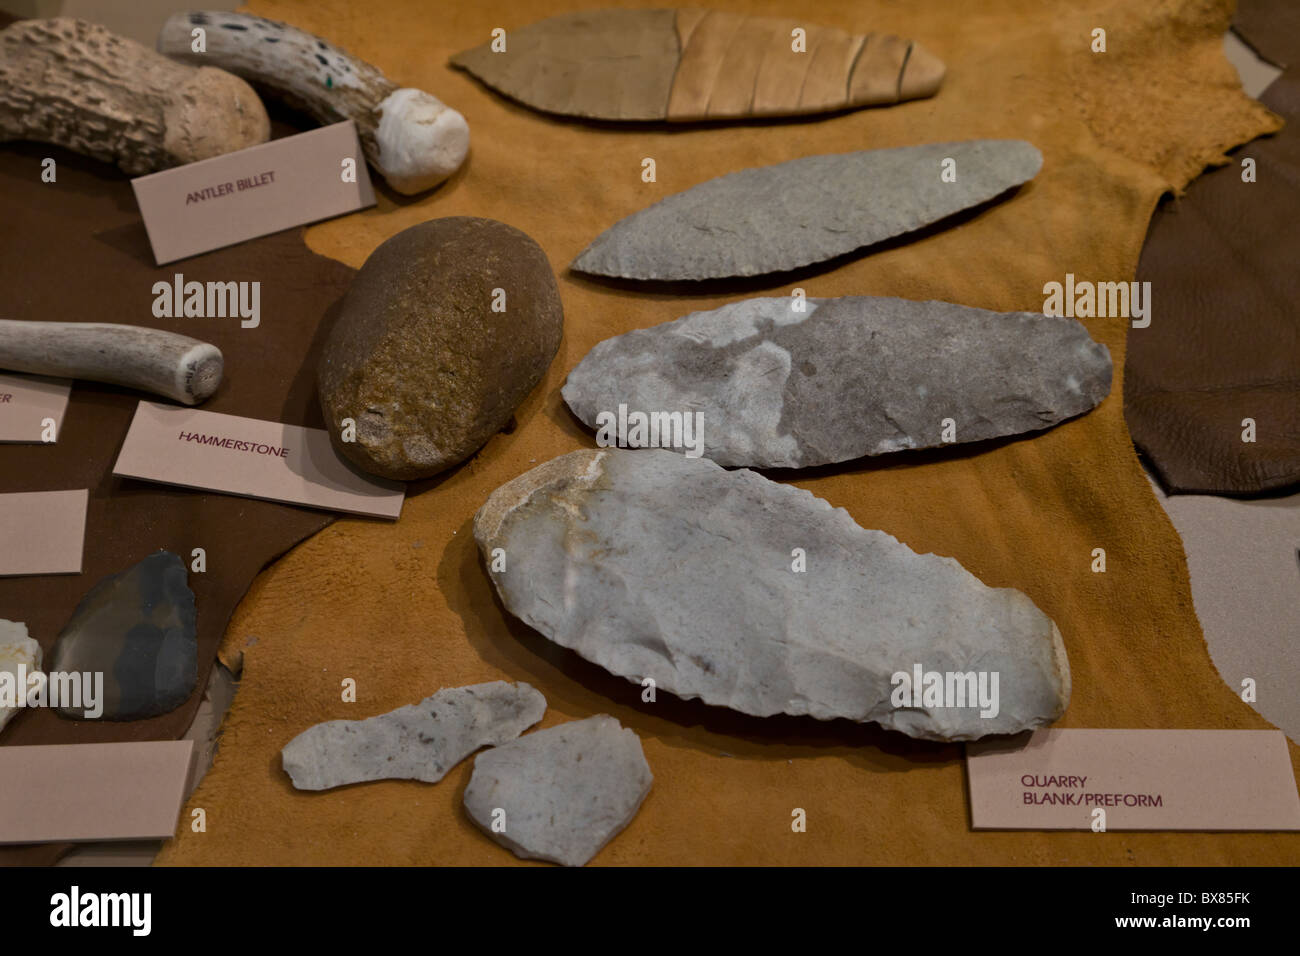 Variety of Mississippian stone tools including a Hammerstone and antler billet at Cahokia Mounds, Illinois, USA. Stock Photo